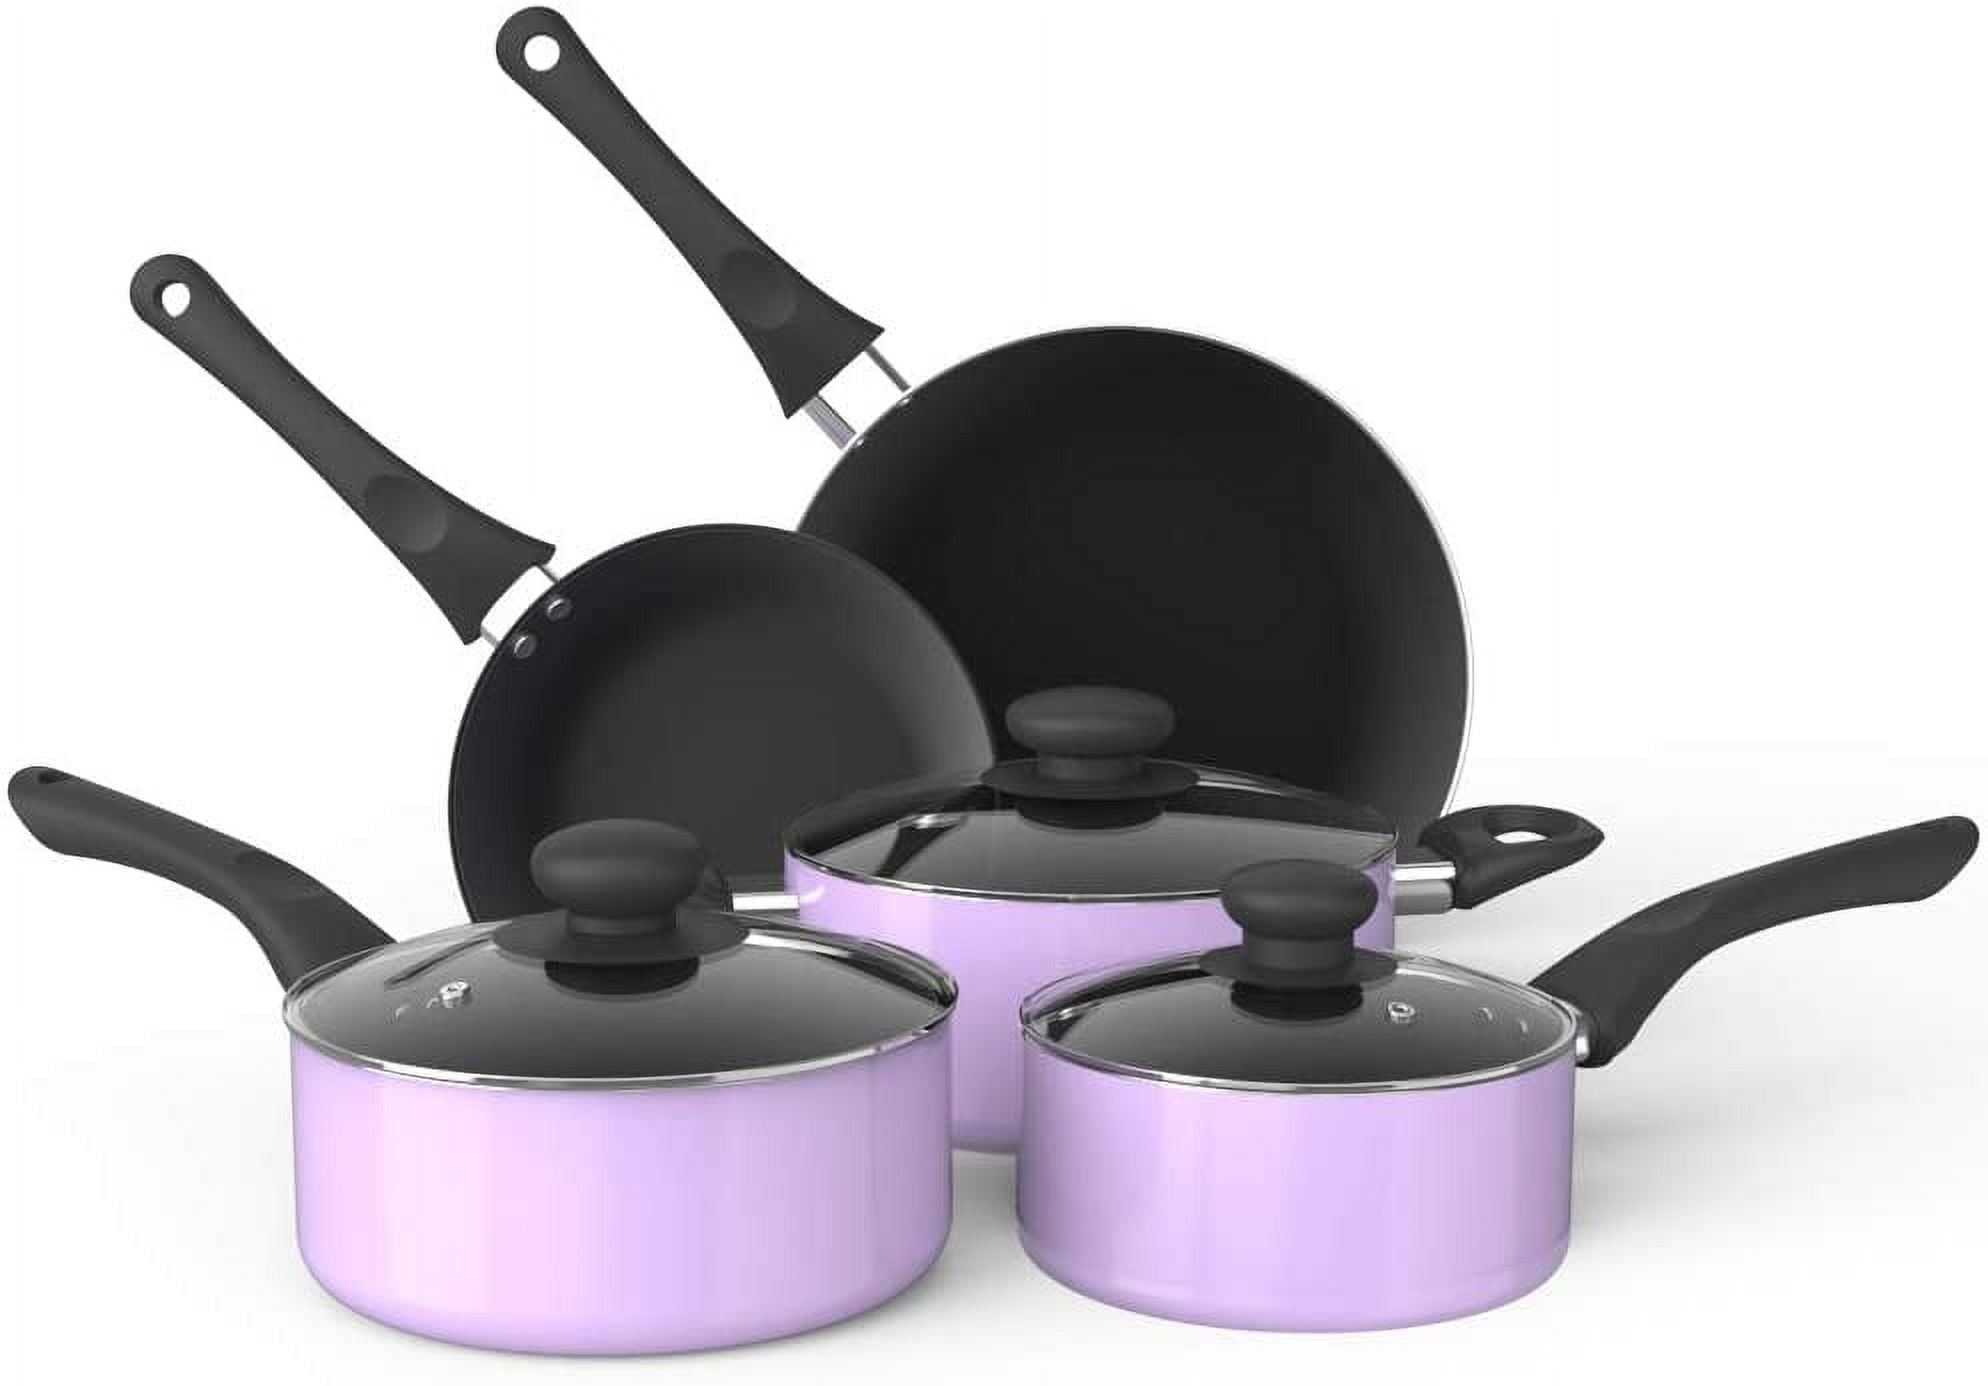 Brand New Induction Cookware Sets - 8 Piece Non-stick Pots and